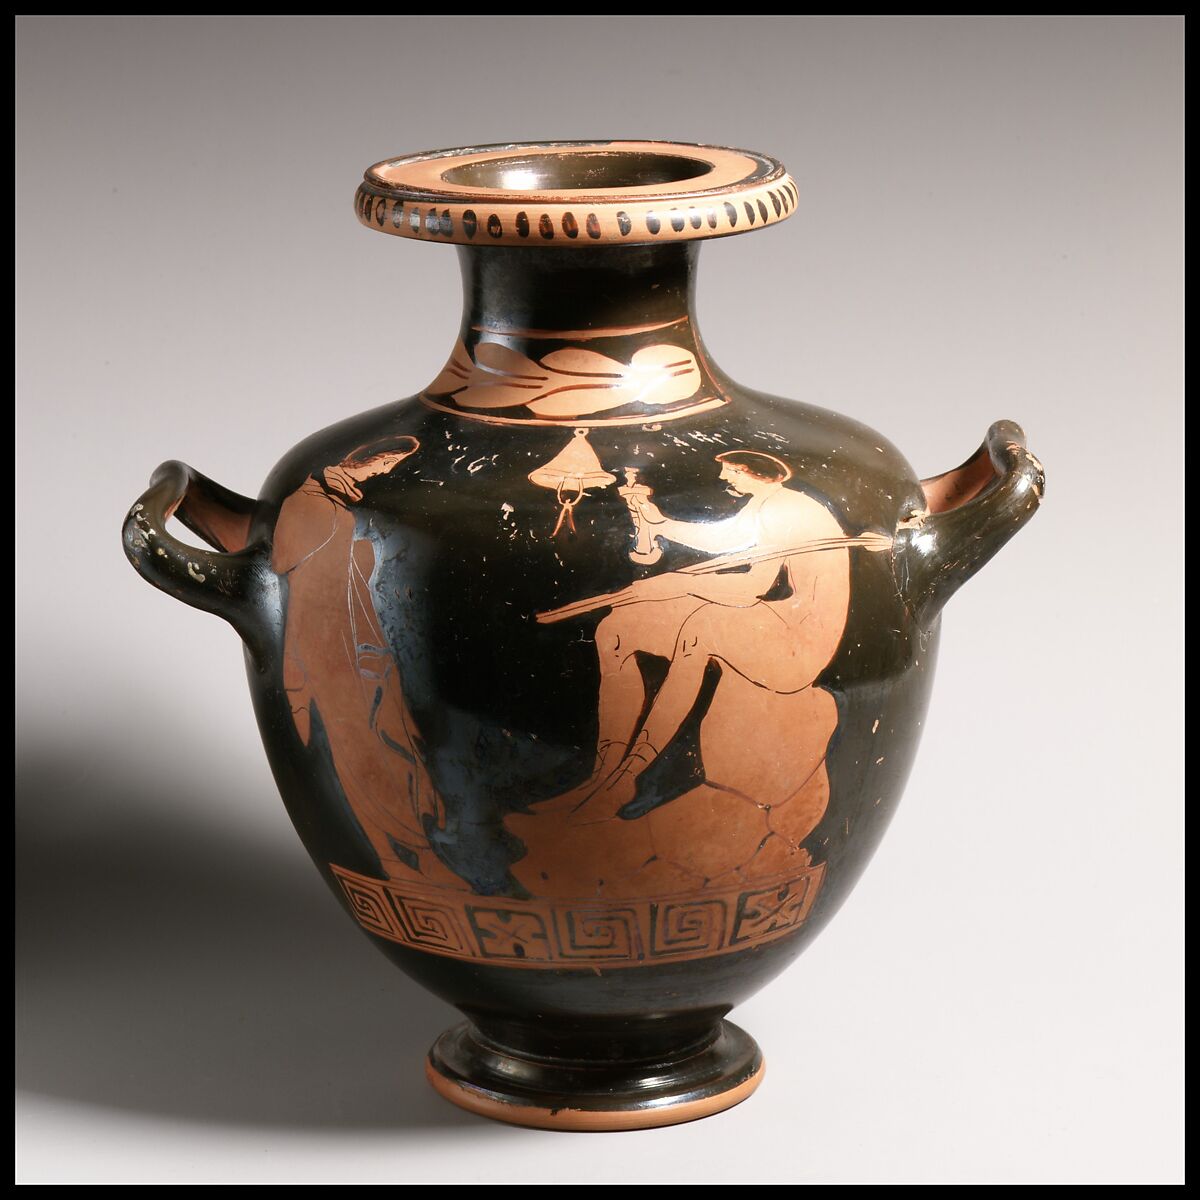 Hydria, Attributed to the Workshop of the Creusa Painter, Terracotta, Greek, South Italian, Lucanian 